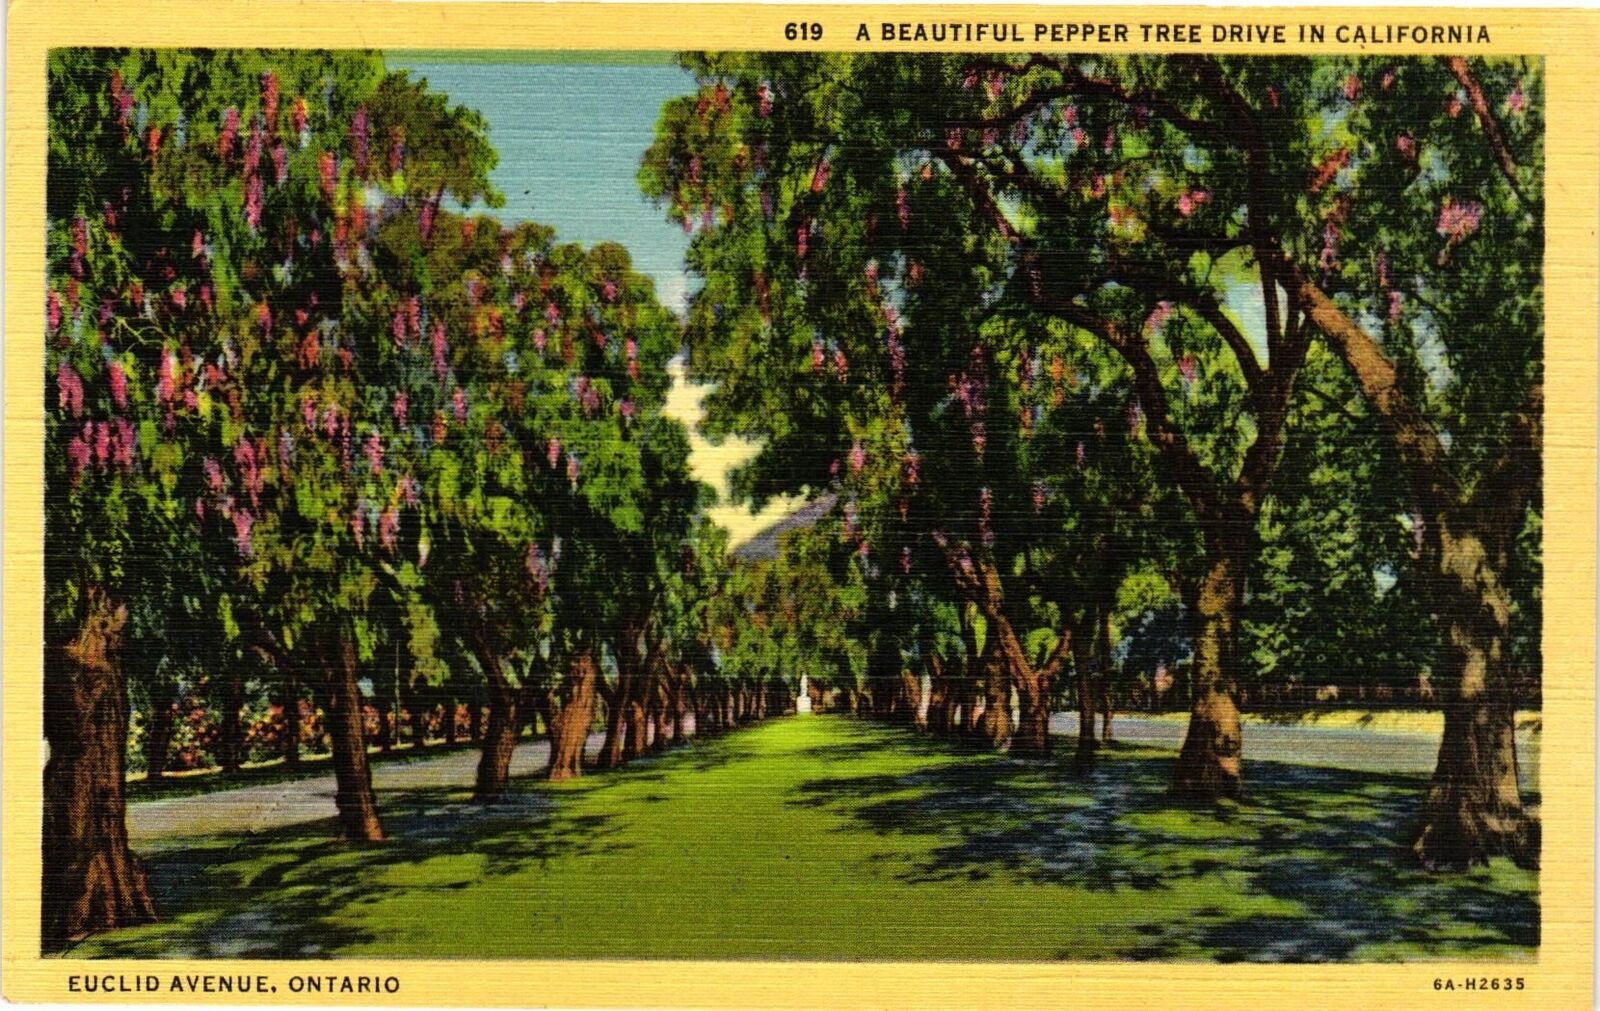 Vintage Postcard- Pepper Tree Drive, California. Early 1900s